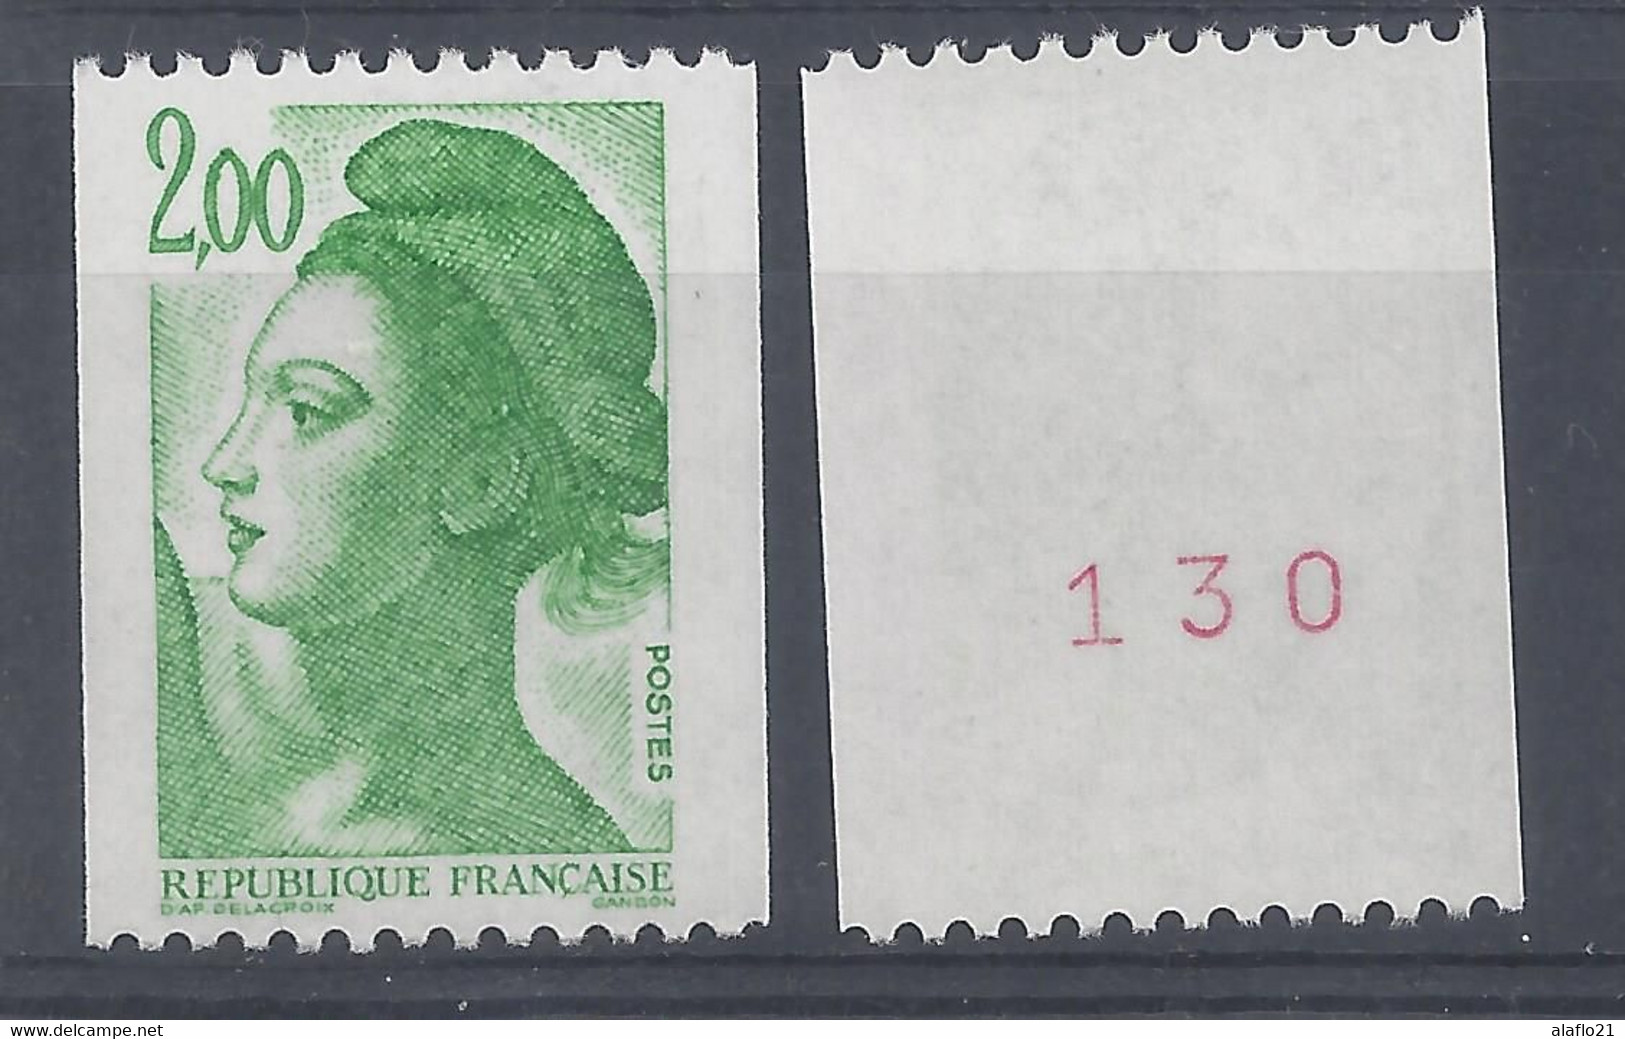 LIBERTE - ROULETTE Avec N° ROUGE N° 2487a - NEUF SANS CHARNIERE - Coil Stamps